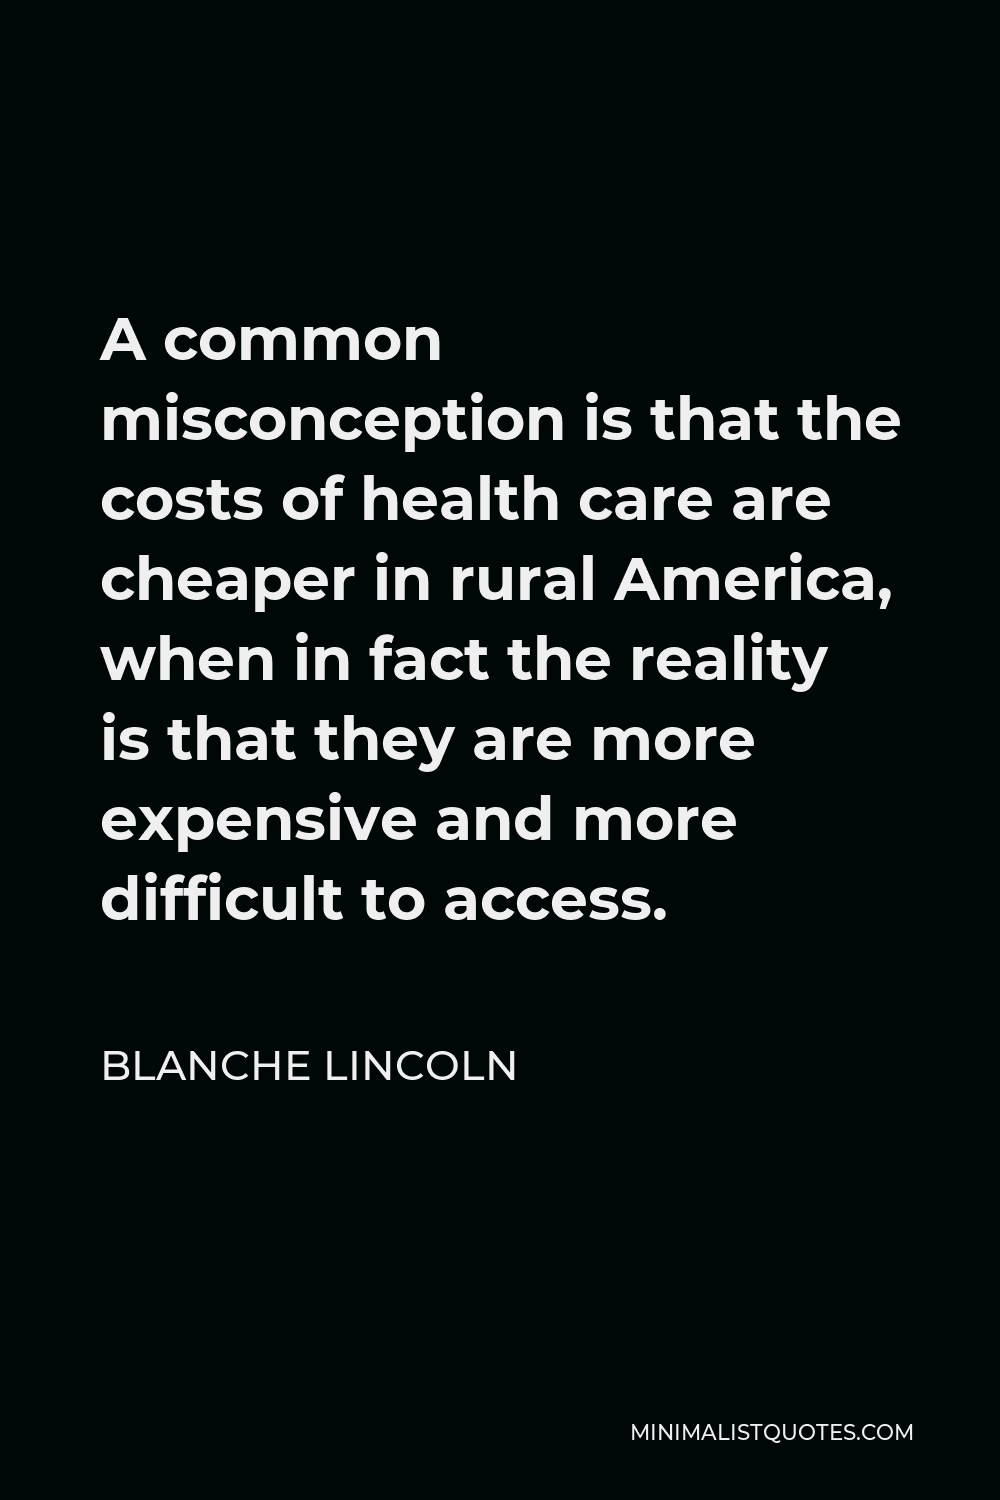 Blanche Lincoln Quote - A common misconception is that the costs of health care are cheaper in rural America, when in fact the reality is that they are more expensive and more difficult to access.